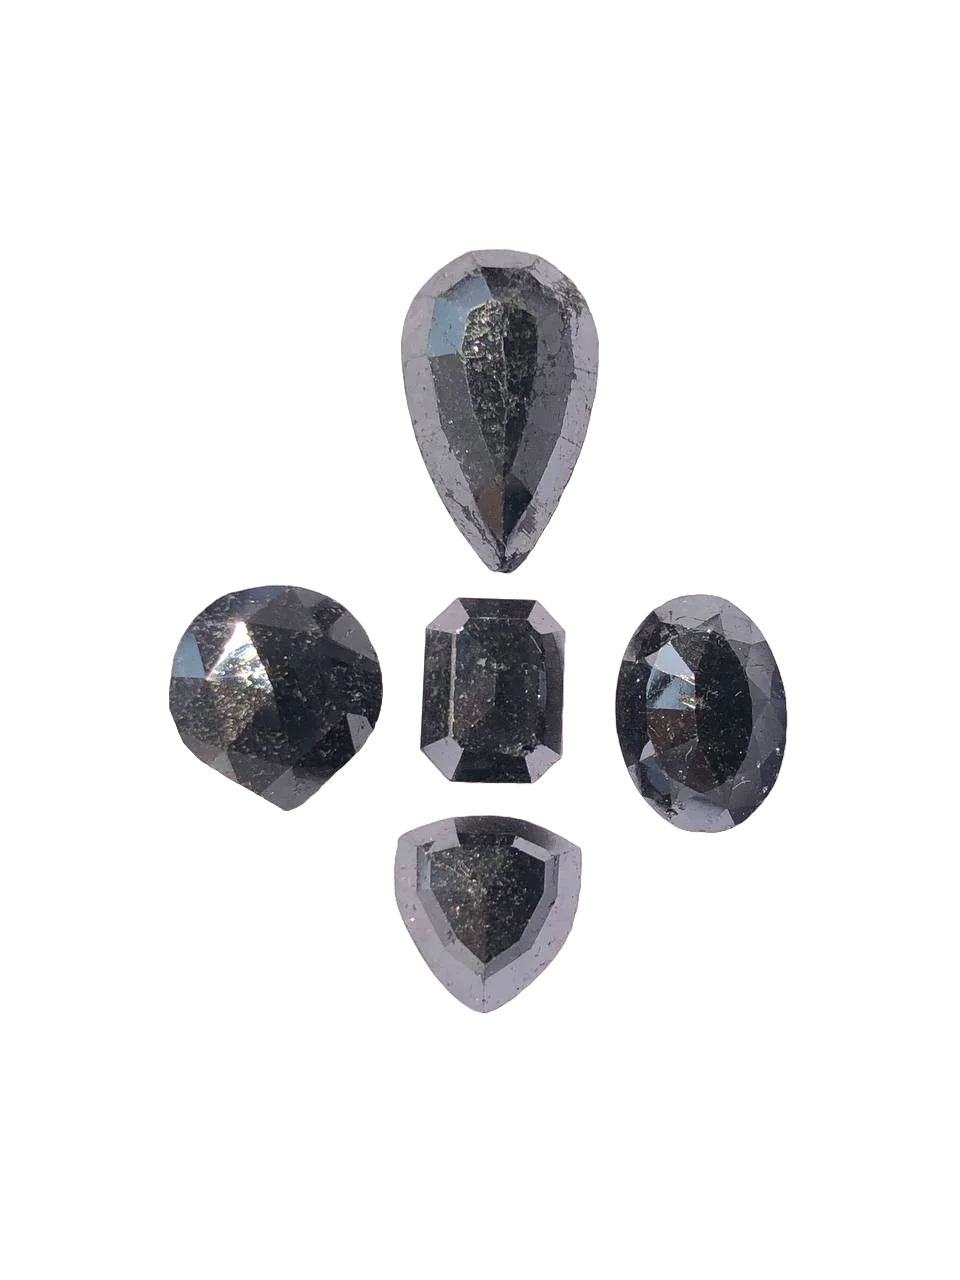 19.83 Ct Natural Mixed-Shape Black Loose Diamond For Striking Jewelry Designs